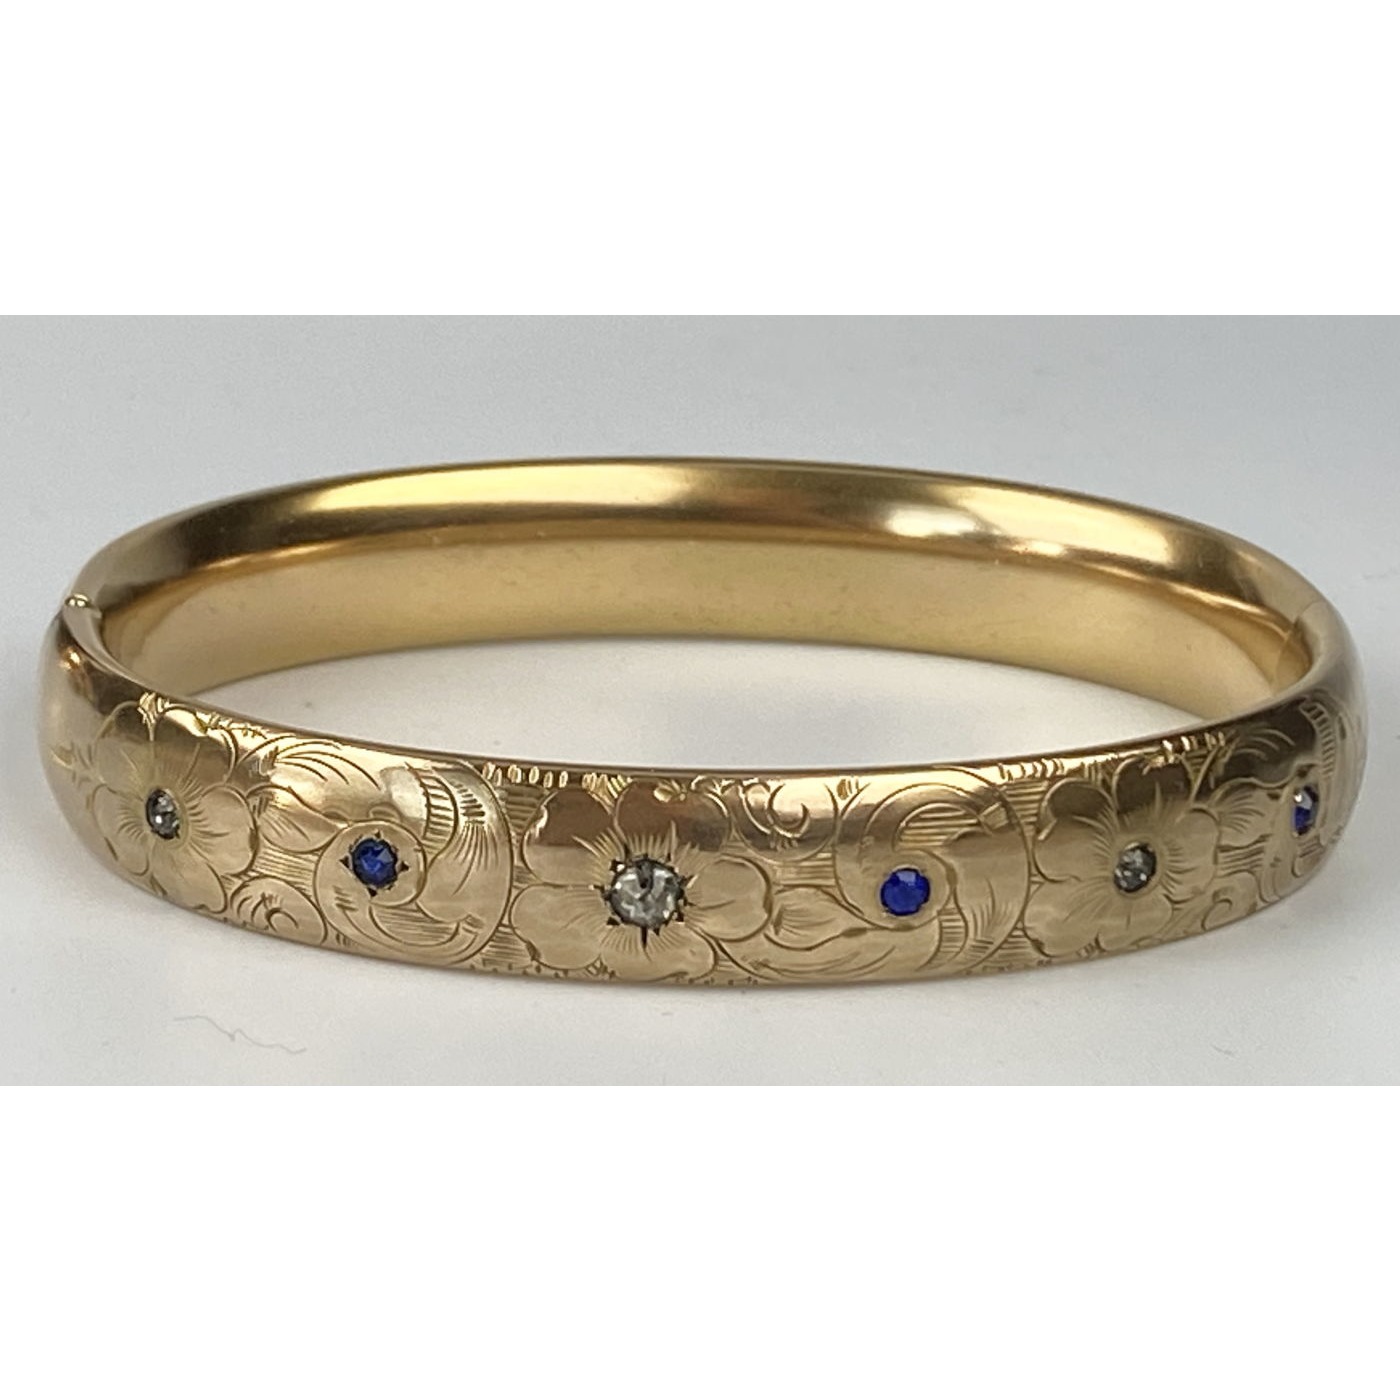 Unusual Blue and Clear Stones and Floral Engraving Engagement Bangle